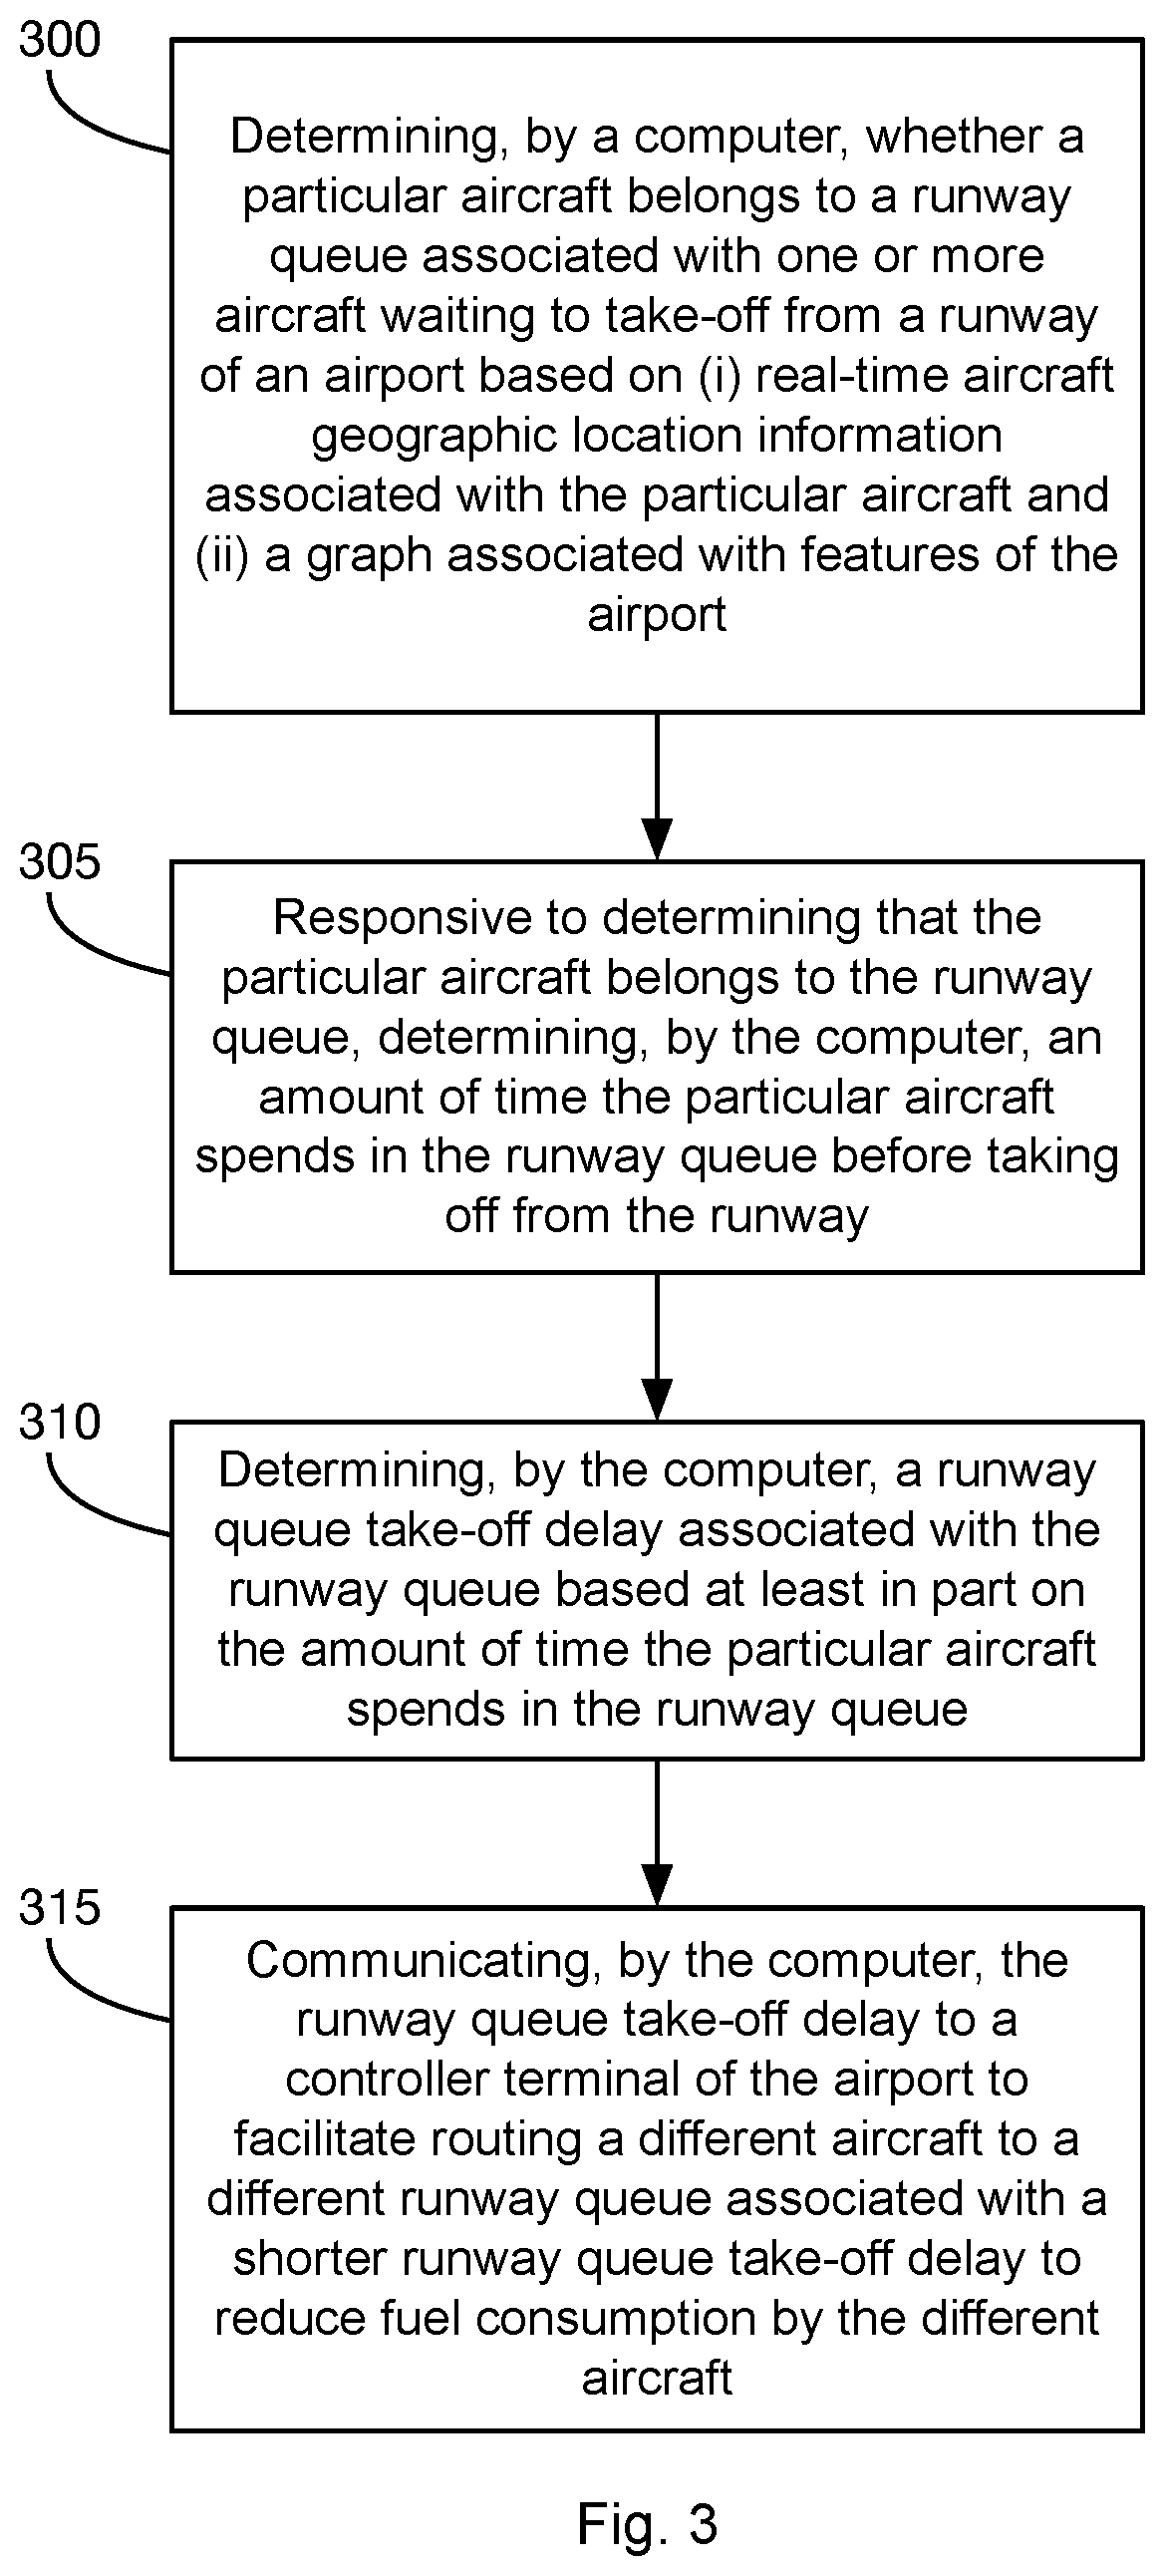 Method and System for Reducing Aircraft Fuel Consumption